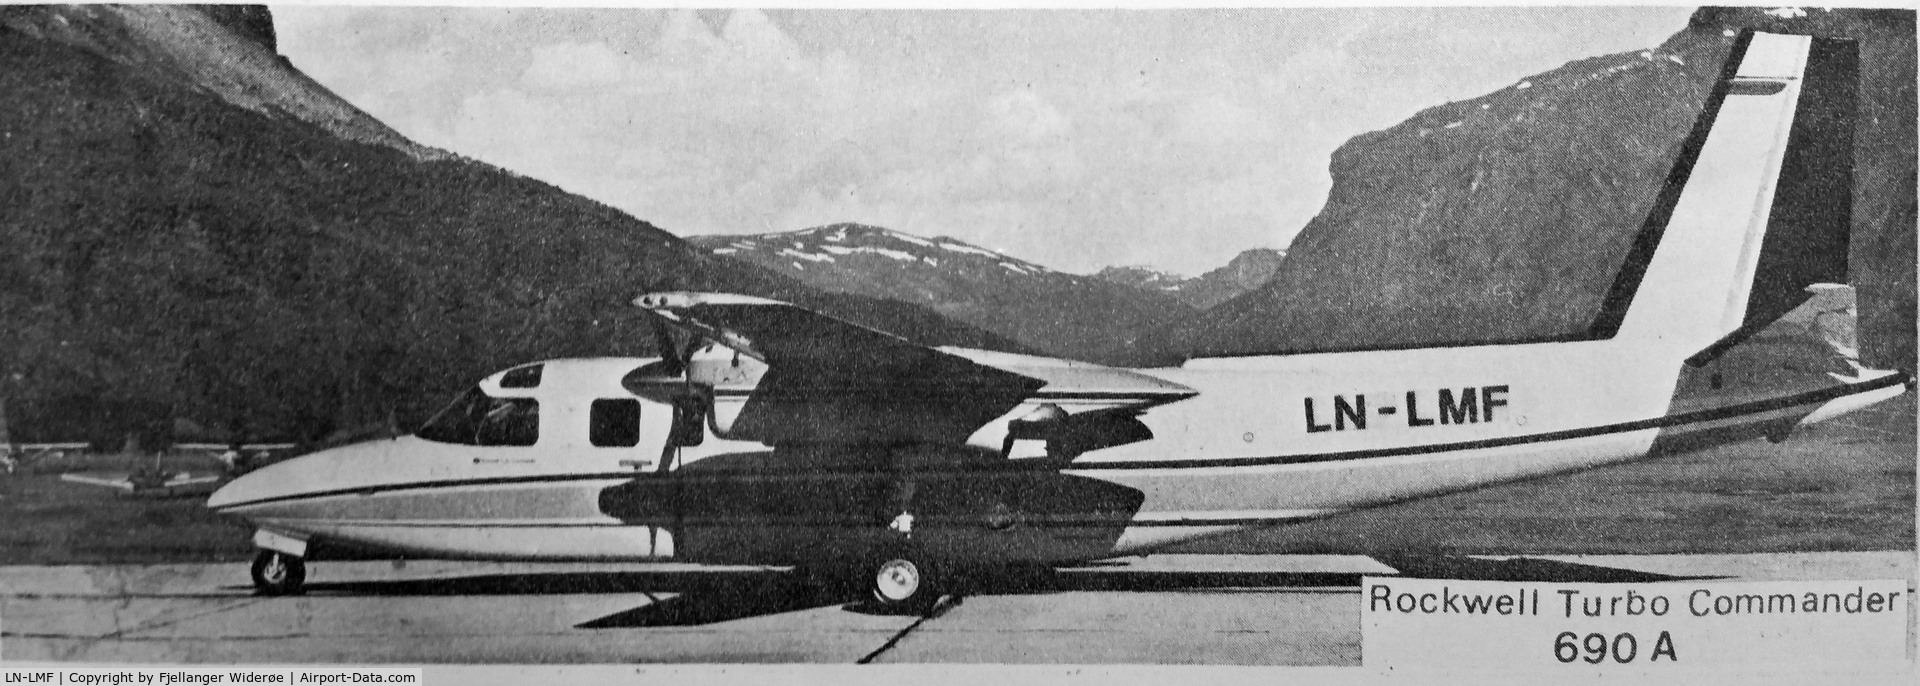 LN-LMF, 1974 Aero Commander 690A Turbo Commander C/N 11215, The photograph is from a 1975 Fjellanger Widerøe office magazine. Fjellanger Widerøe was a Norwegian mapping company.